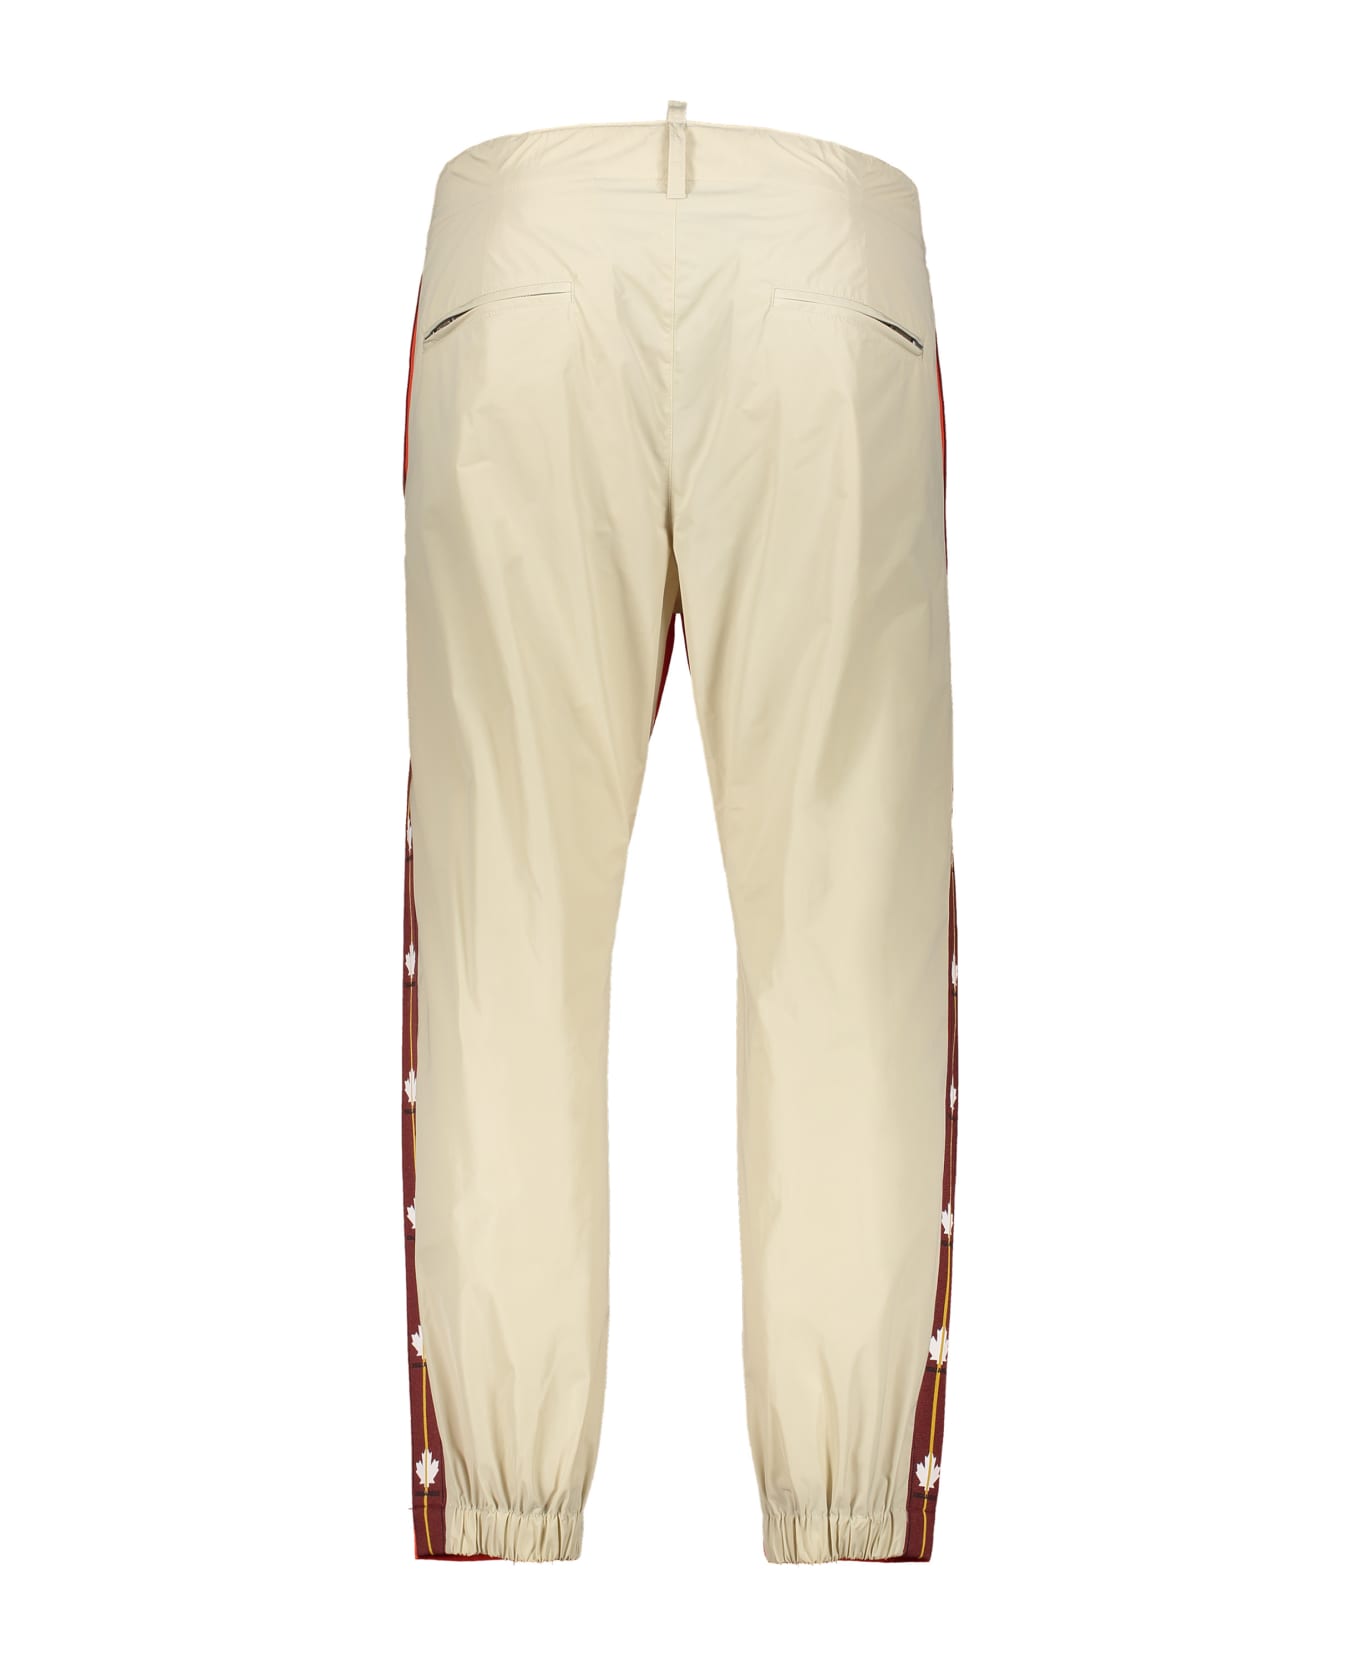 Dsquared2 Track-pants With Contrasting Side Stripes - Orange